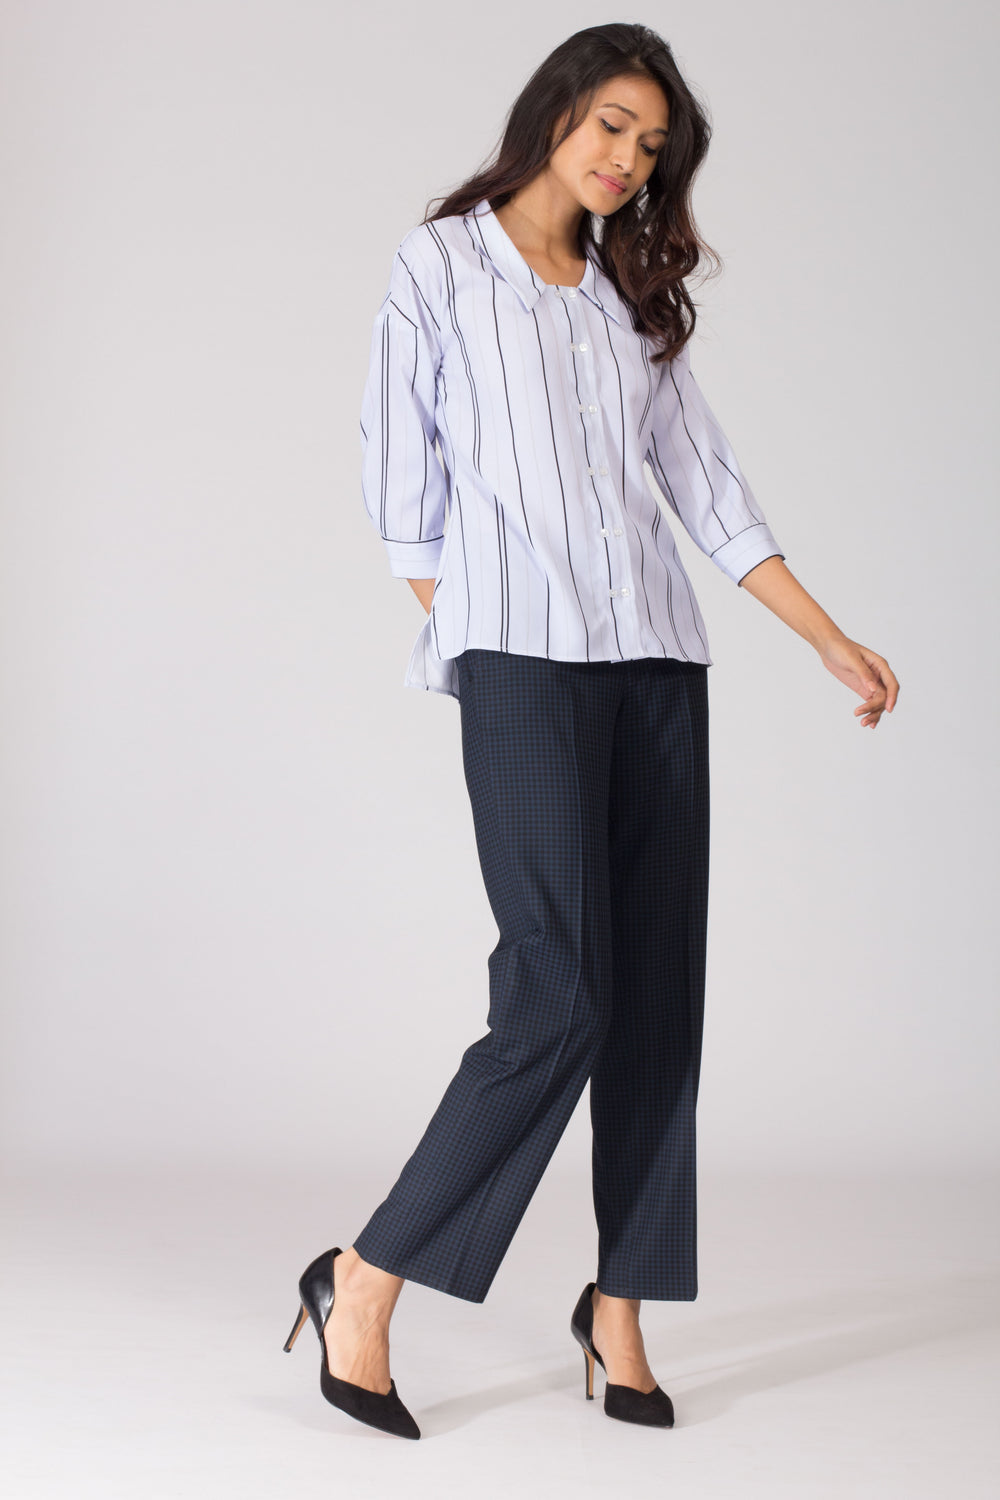 Buy Addyvero Solid Women Black Trouser  Pants Online at Best Prices in  India  JioMart